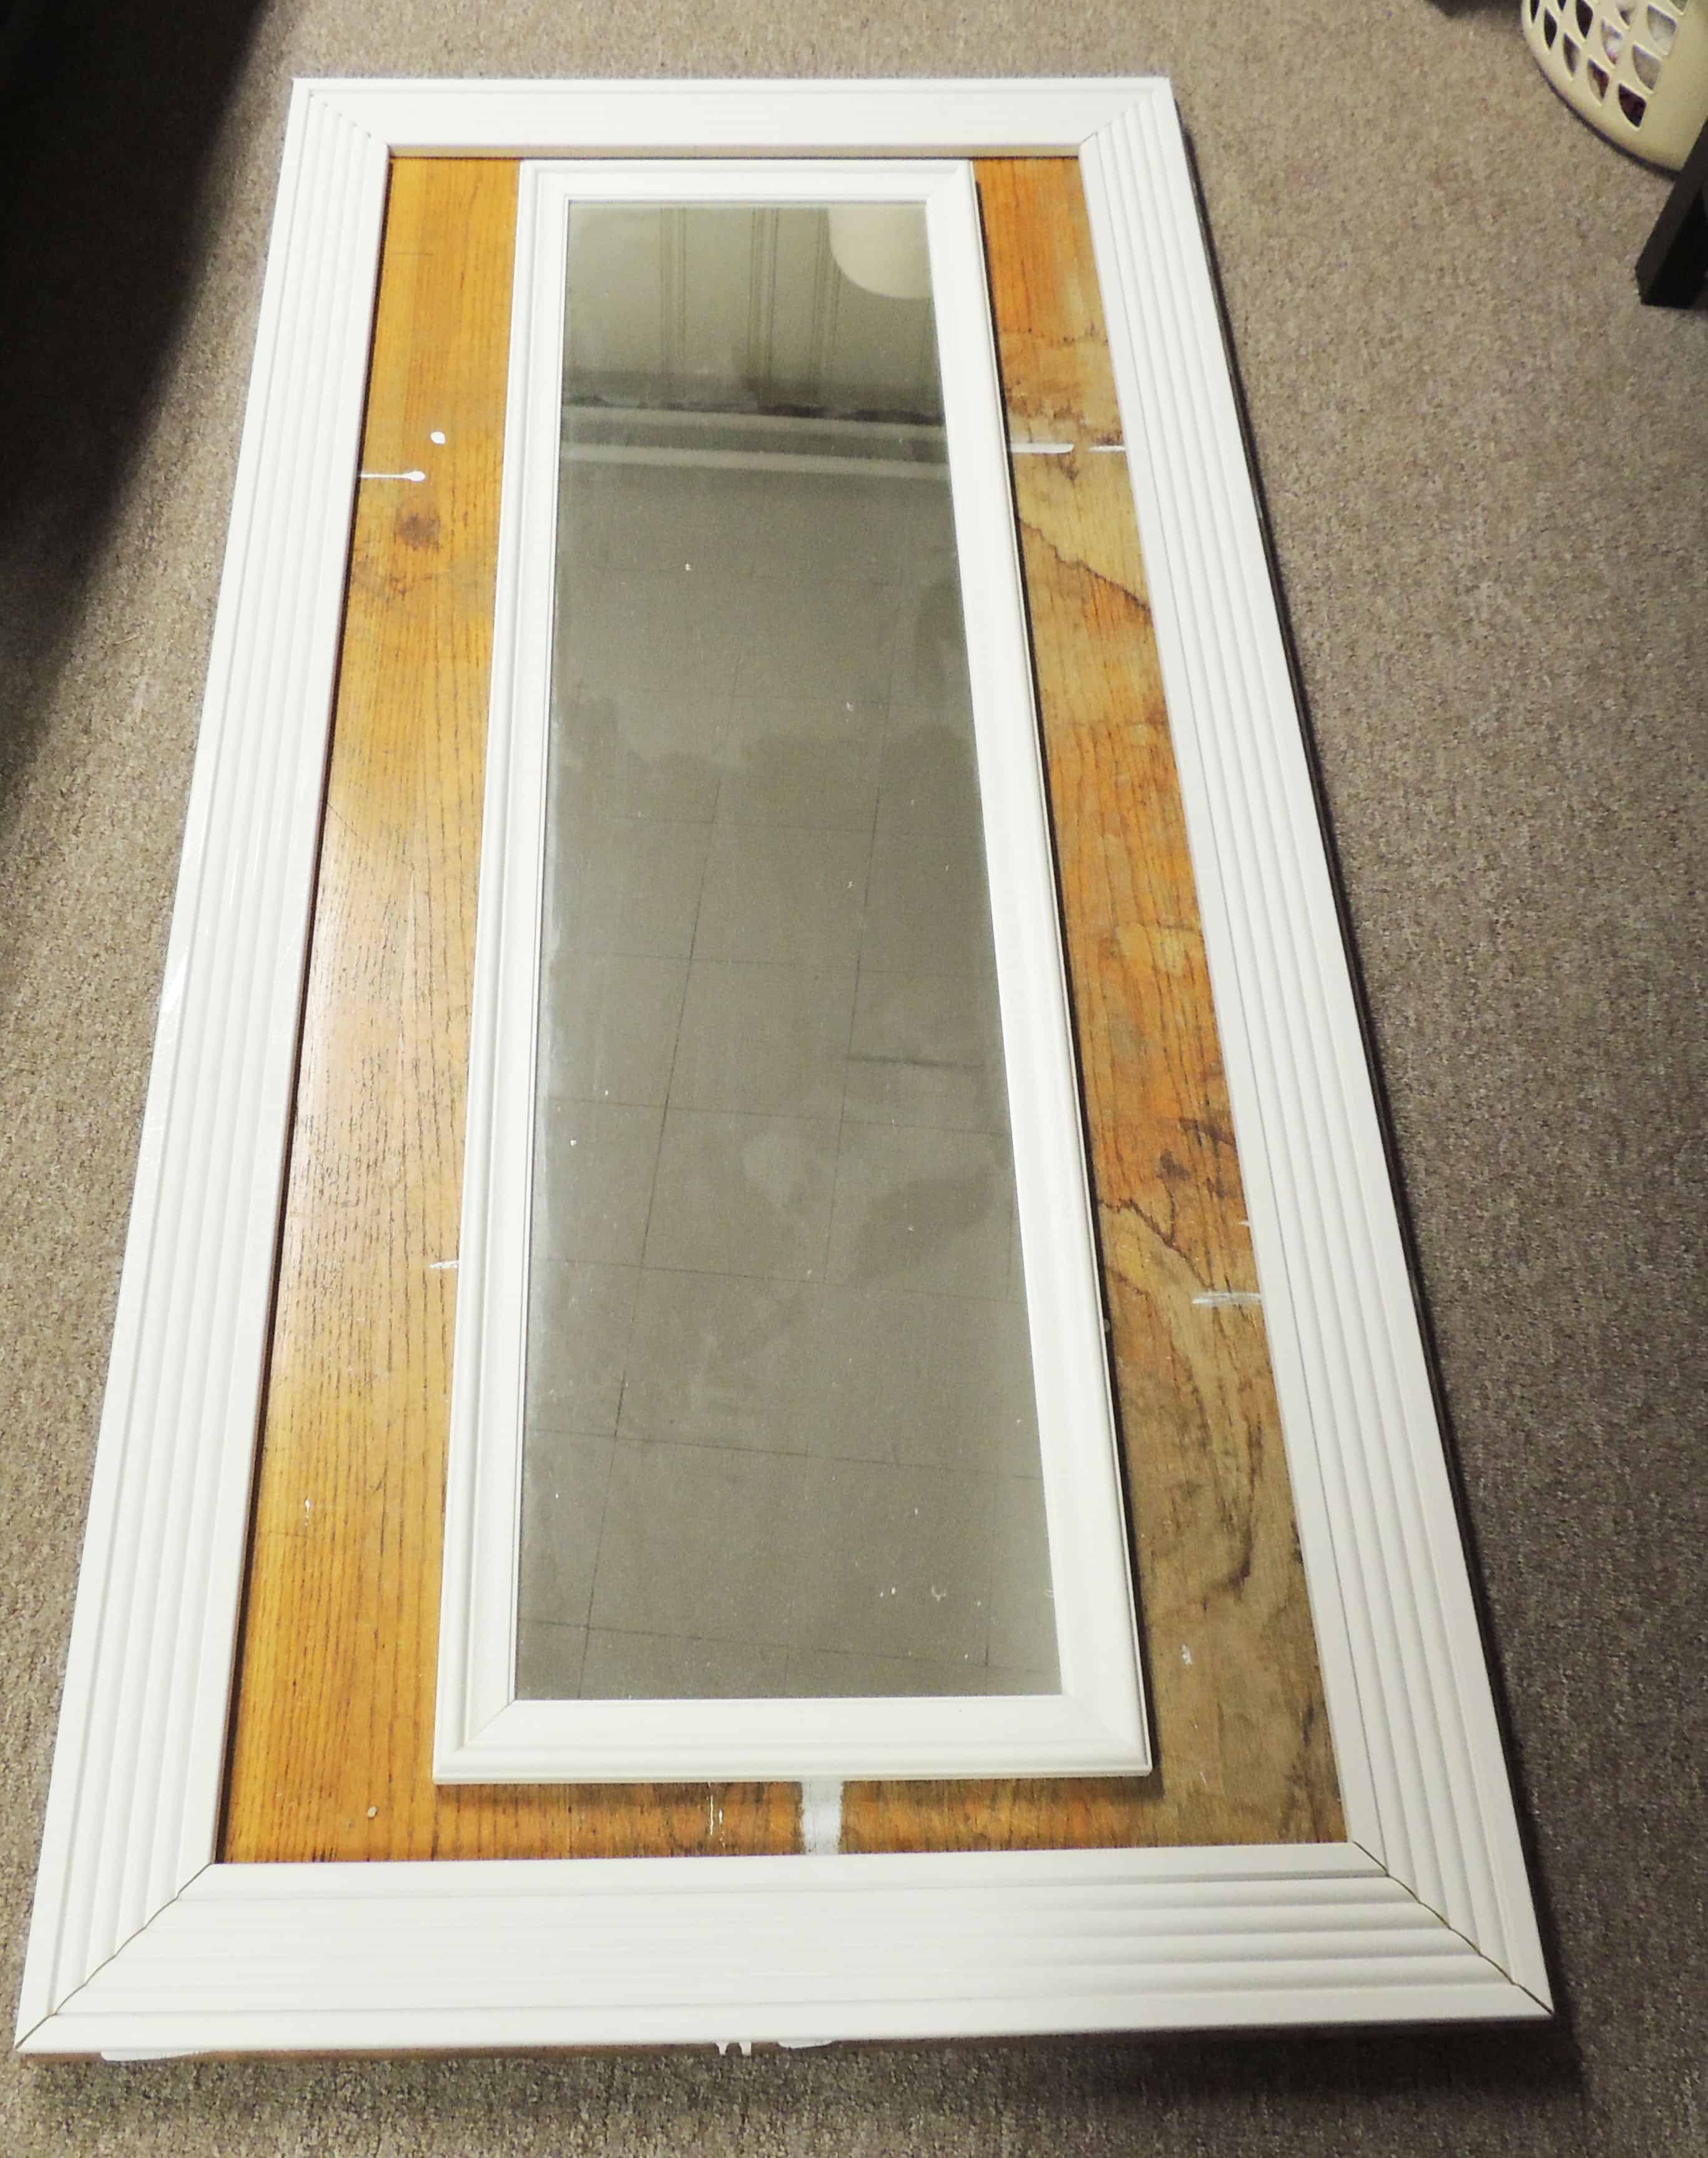 DIY Floor-mirror: $5 mirror set on wooden table with white wooden frame